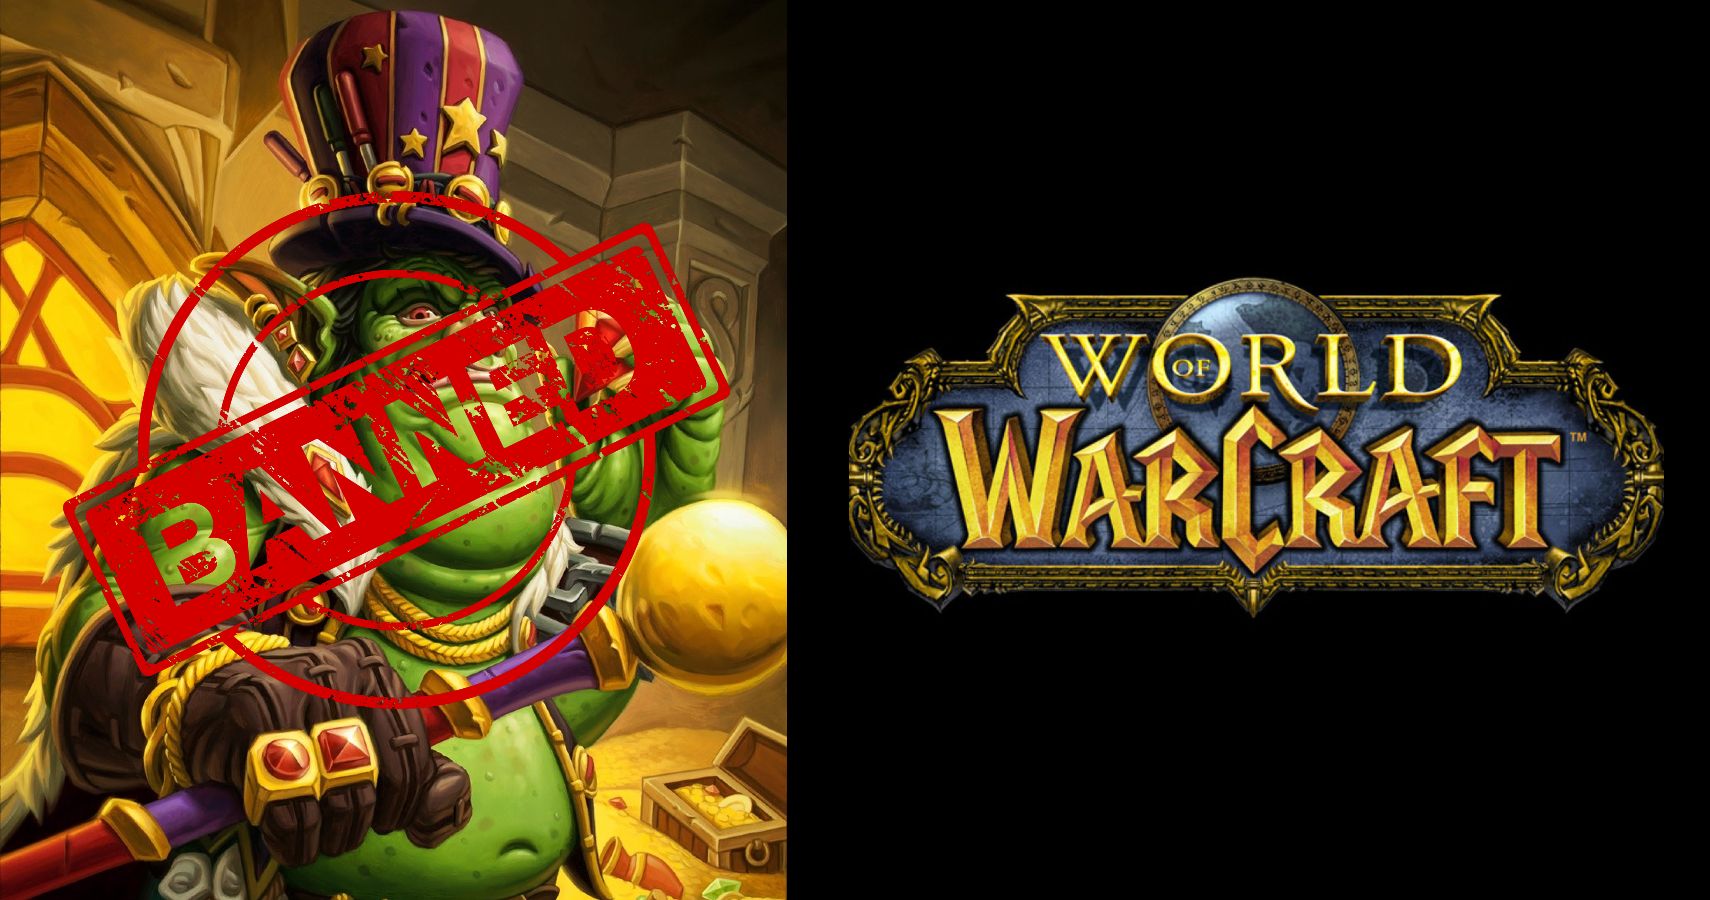 The Fall Of Gallywix Boosting Services Comes As Blizzard Bans For Real Money Trading In World Of Warcraft